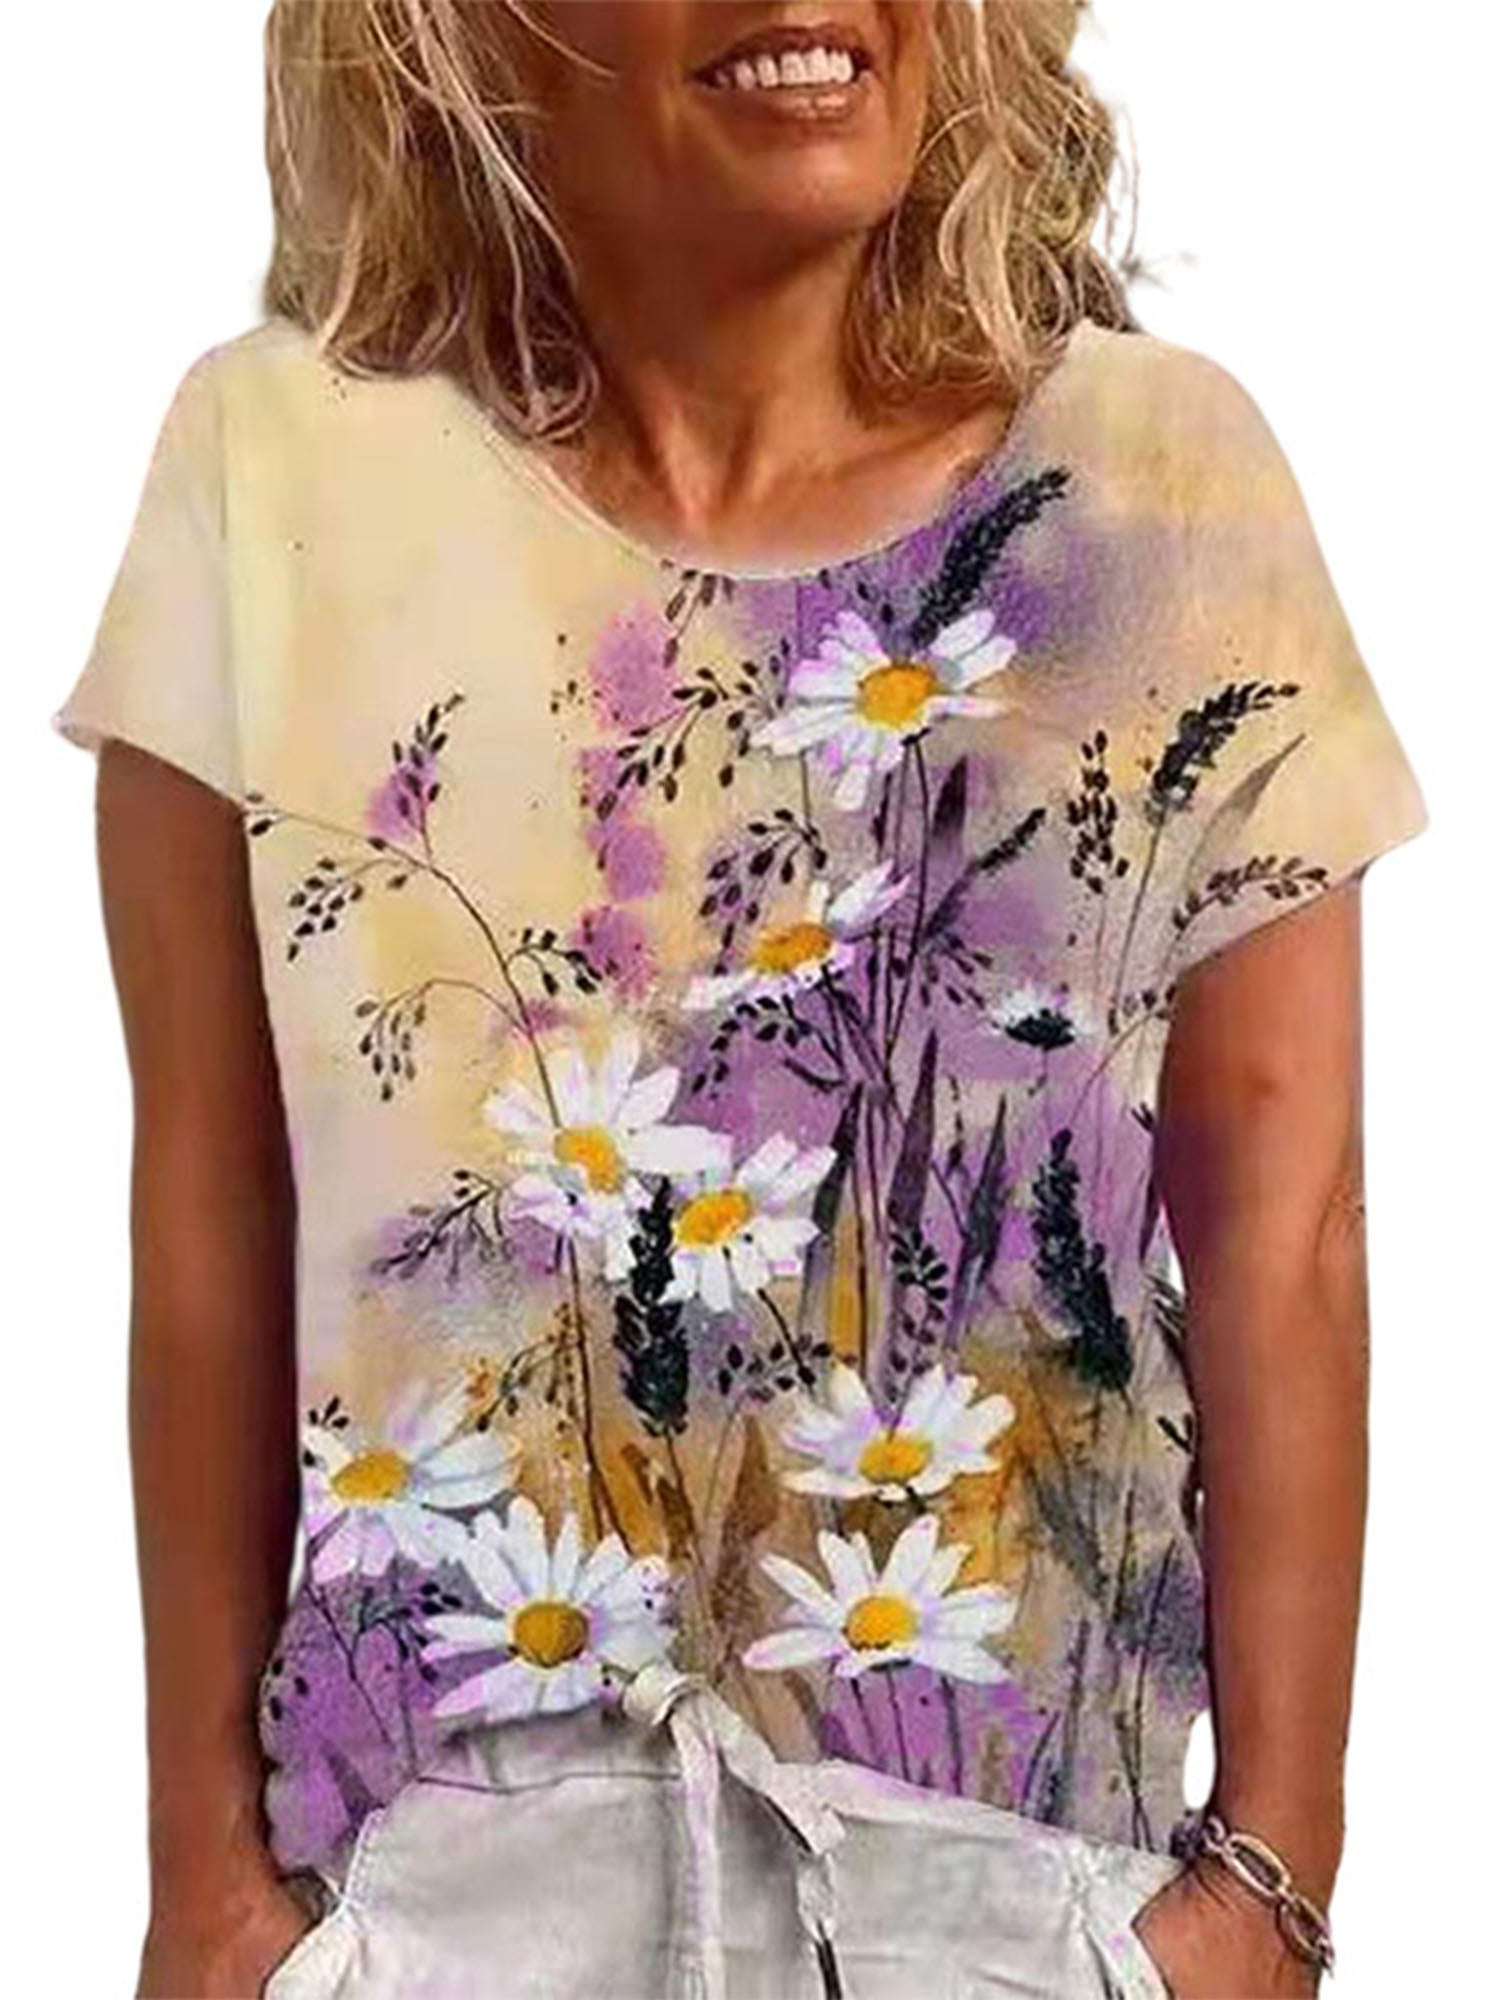 Summer Womens Ladies Casual Tops Blouse Short Sleeve Crew Neck Floral T-Shirt US